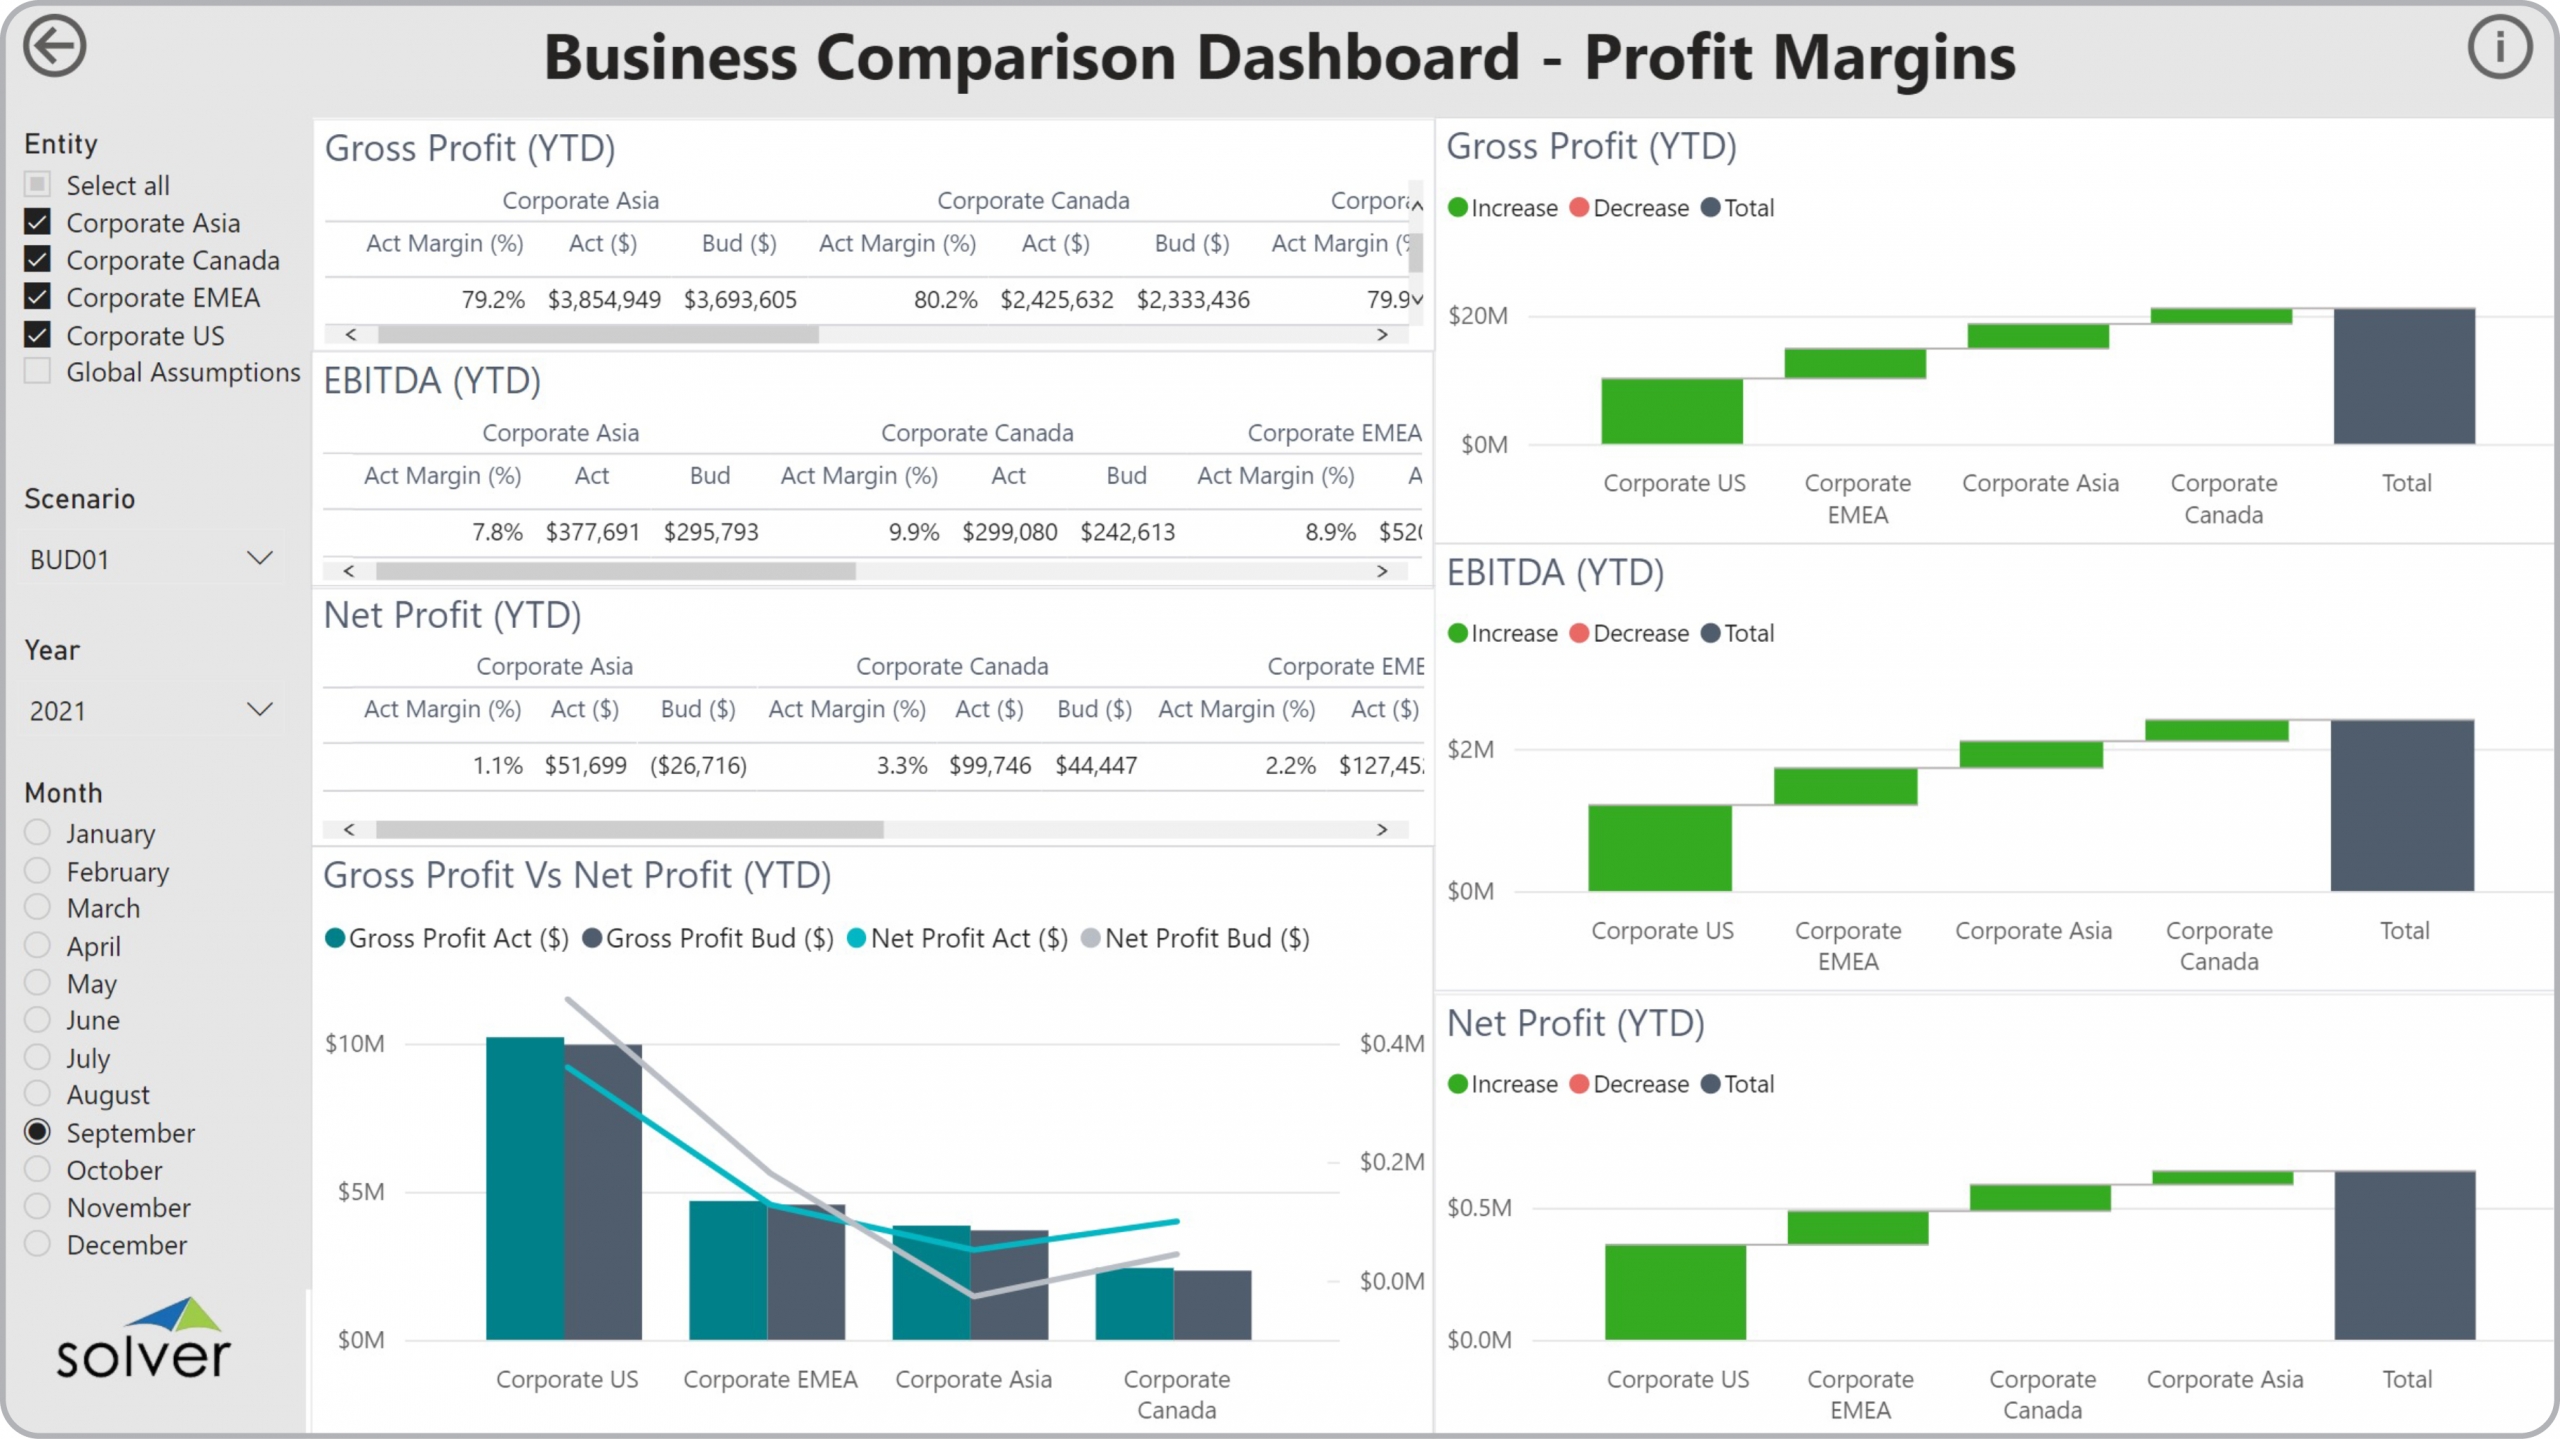 Example of a Profitability Comparison Dashboard to Streamline the Monthly Reporting Process